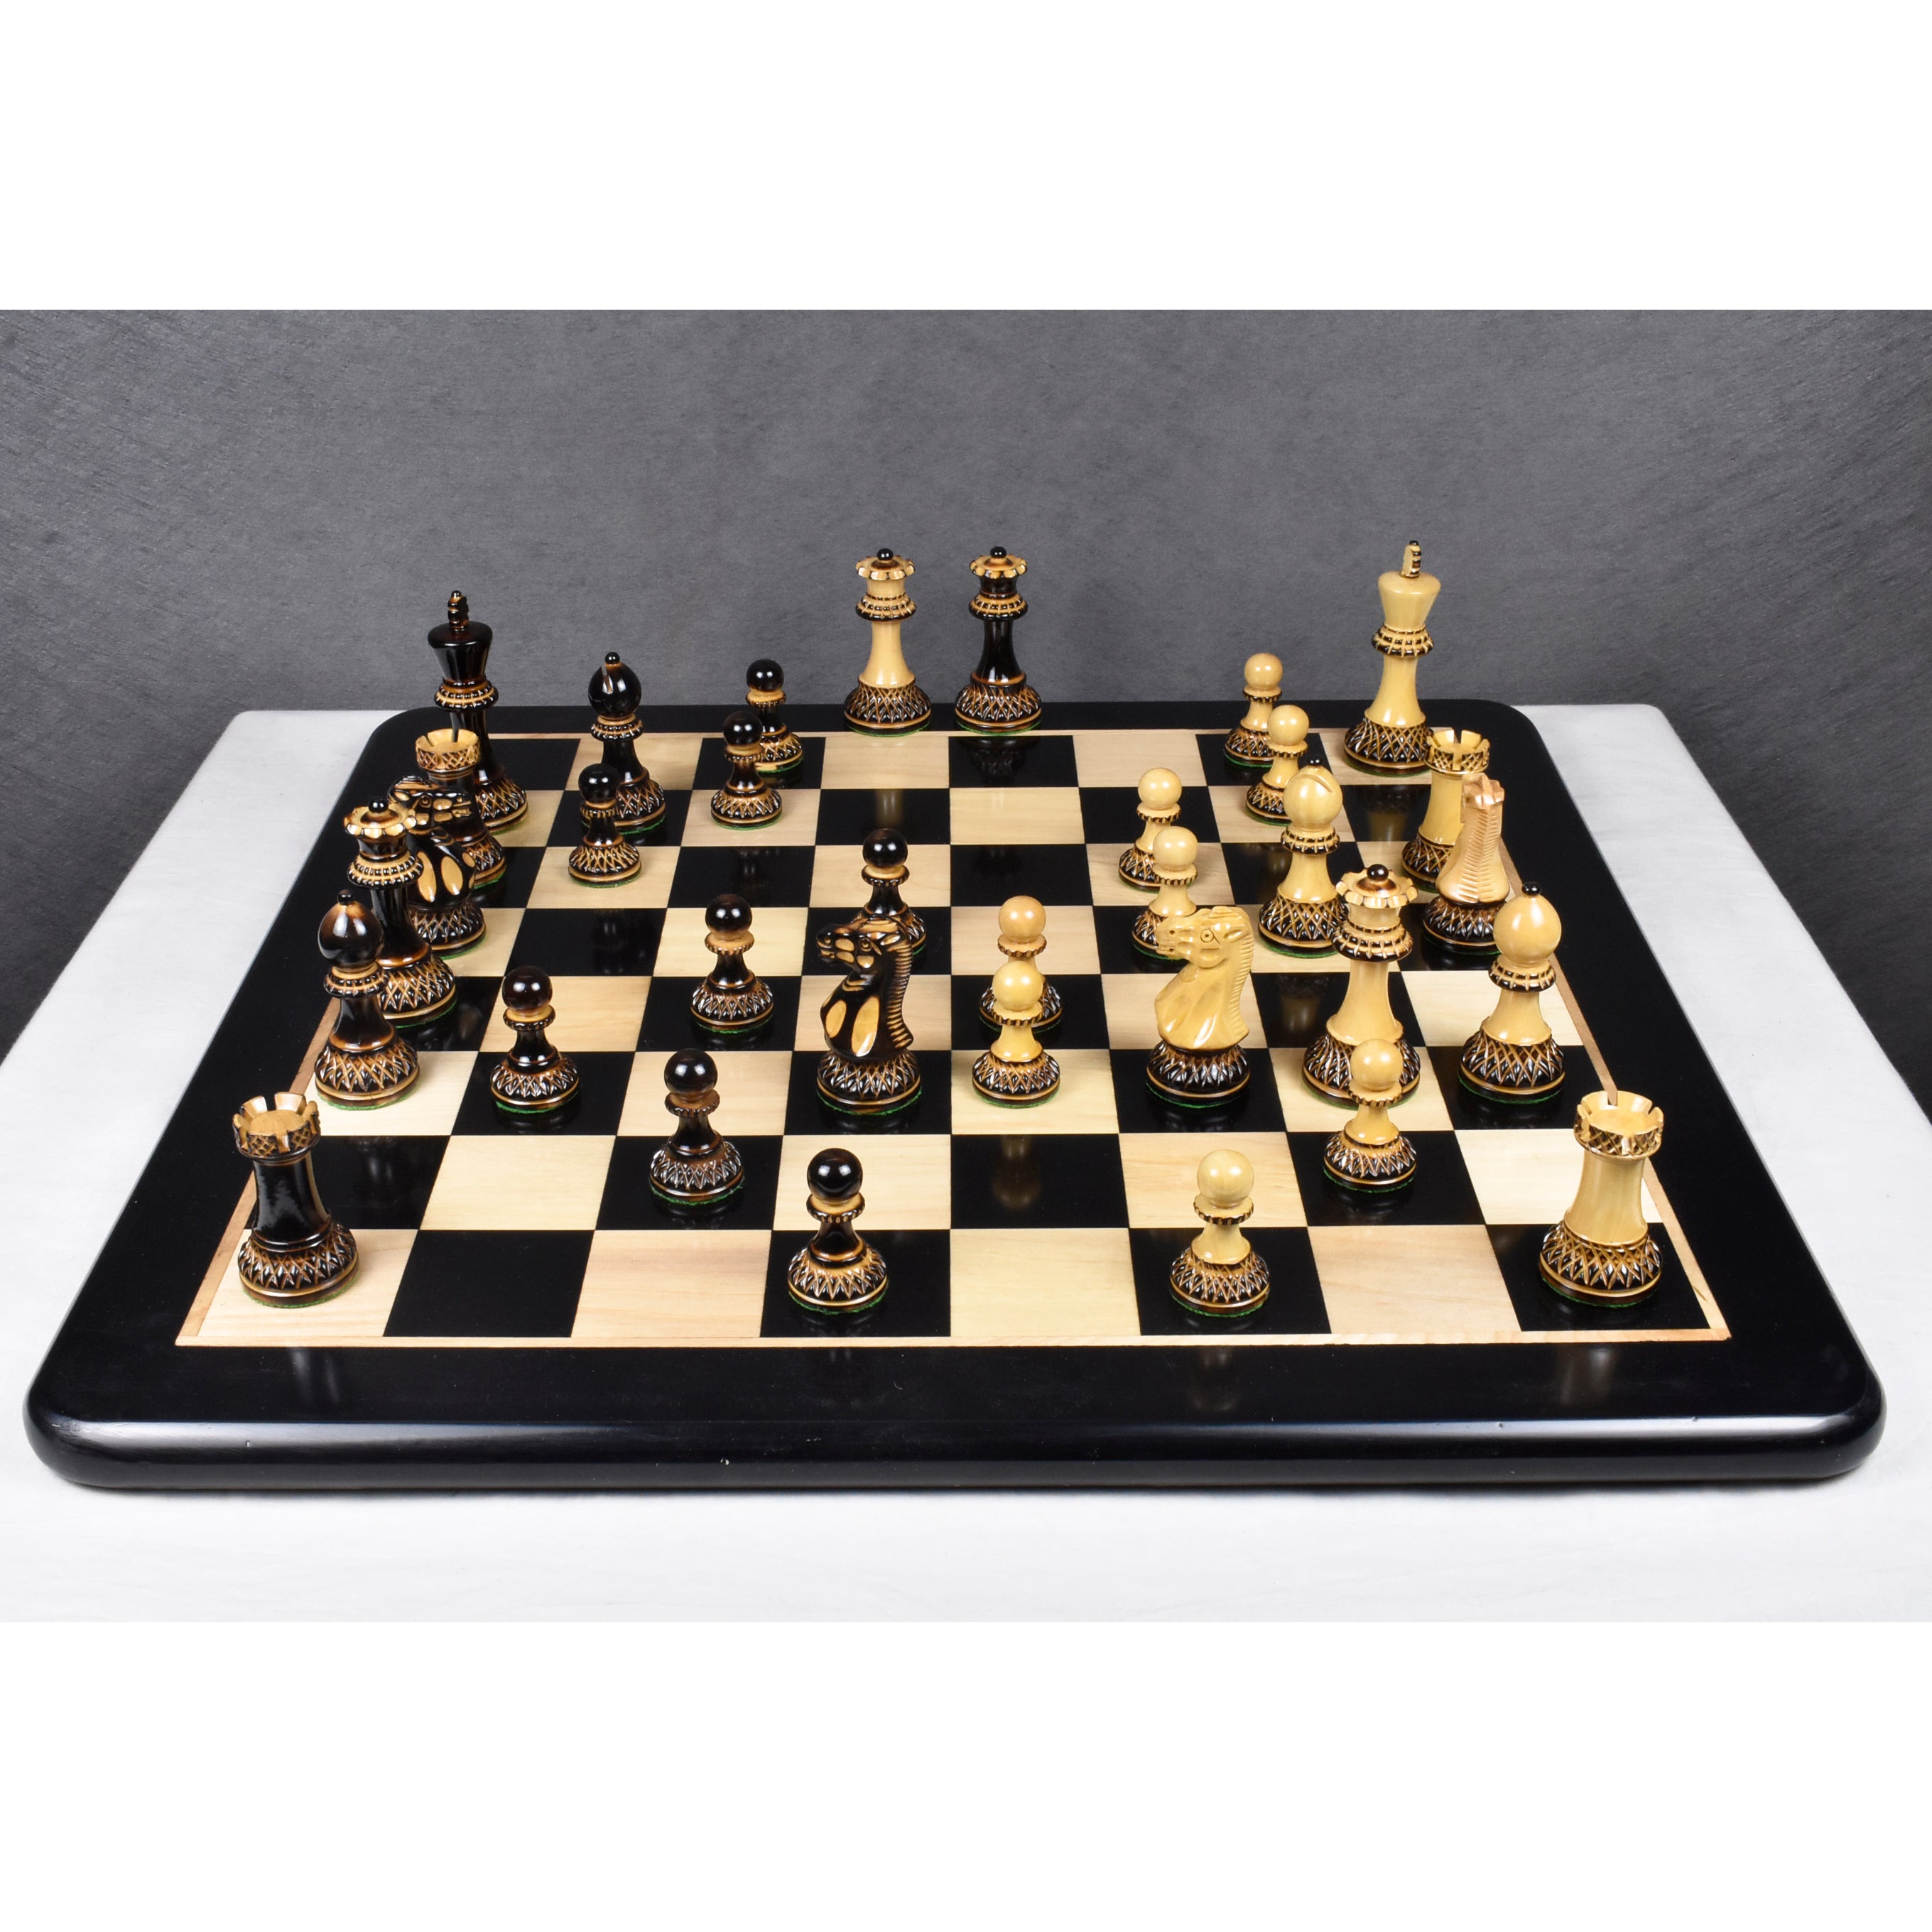 Want to know the name and moves of the chess pieces – Staunton Castle